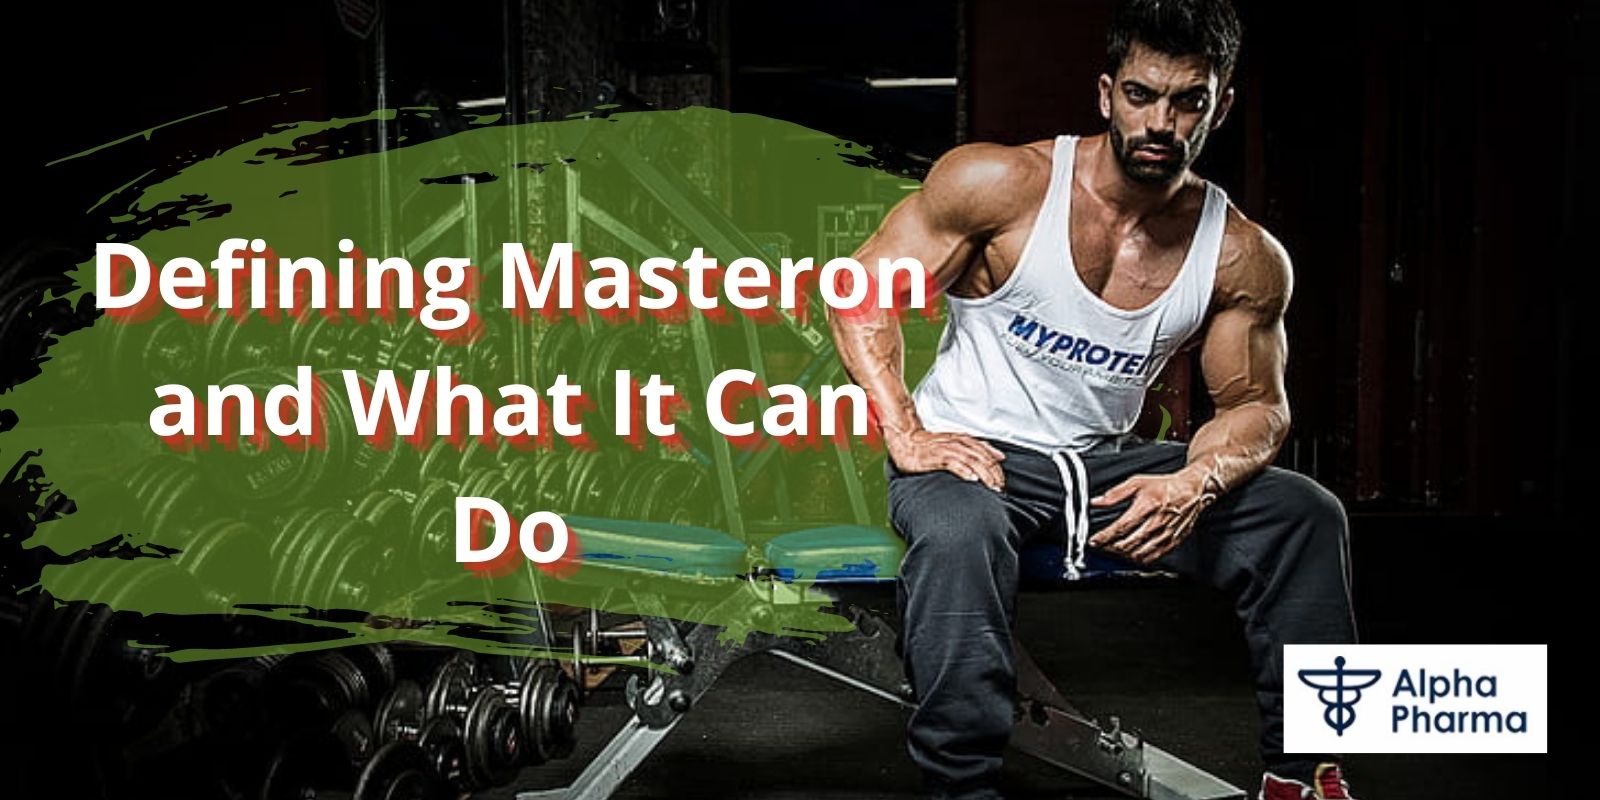 Defining Masteron and What It Can Do